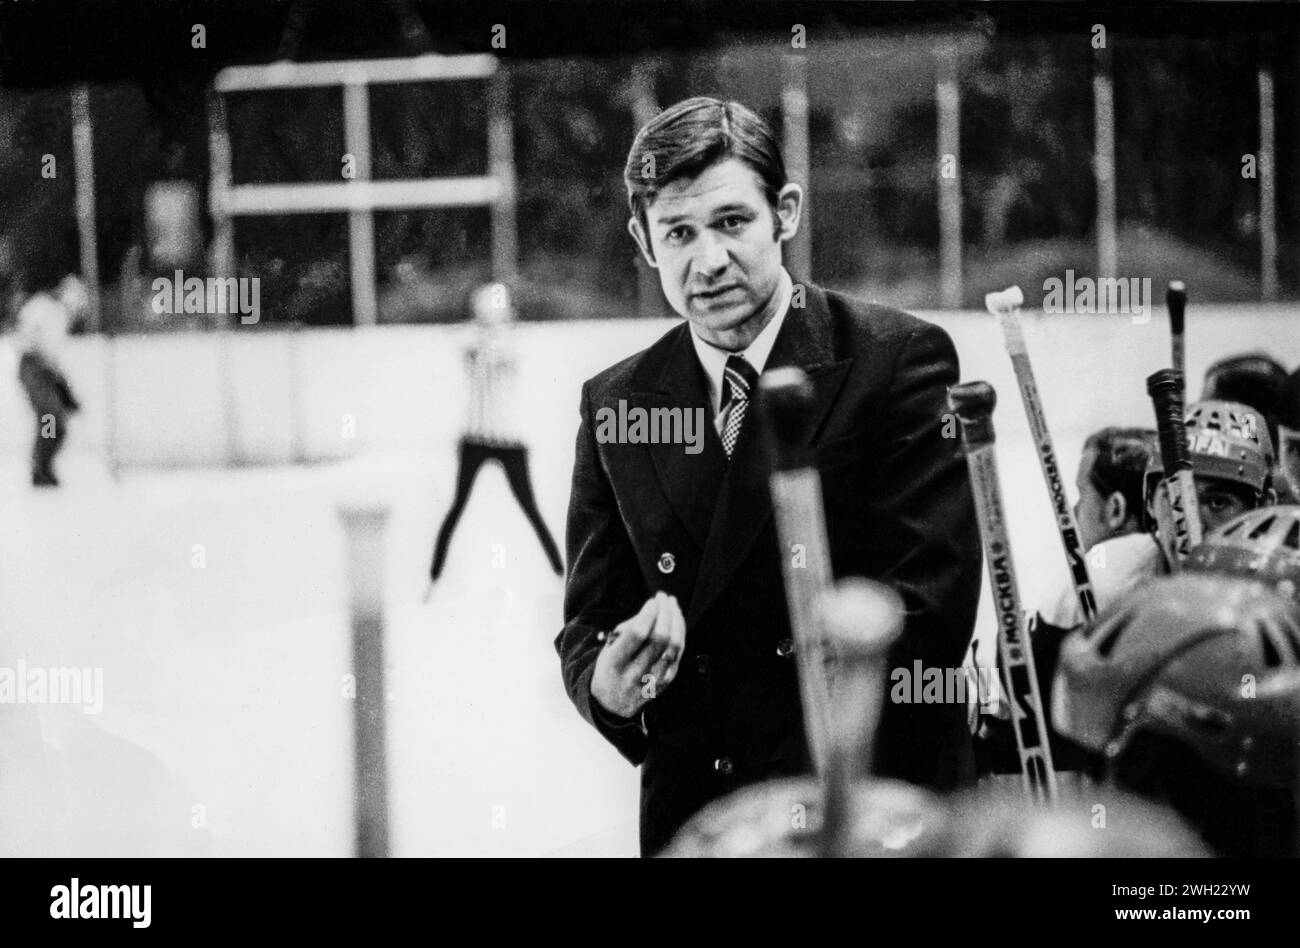 VLADIMIR JURZINOV assistant coach to A Tikhonov in the Soviet player booth at international matches Stock Photo